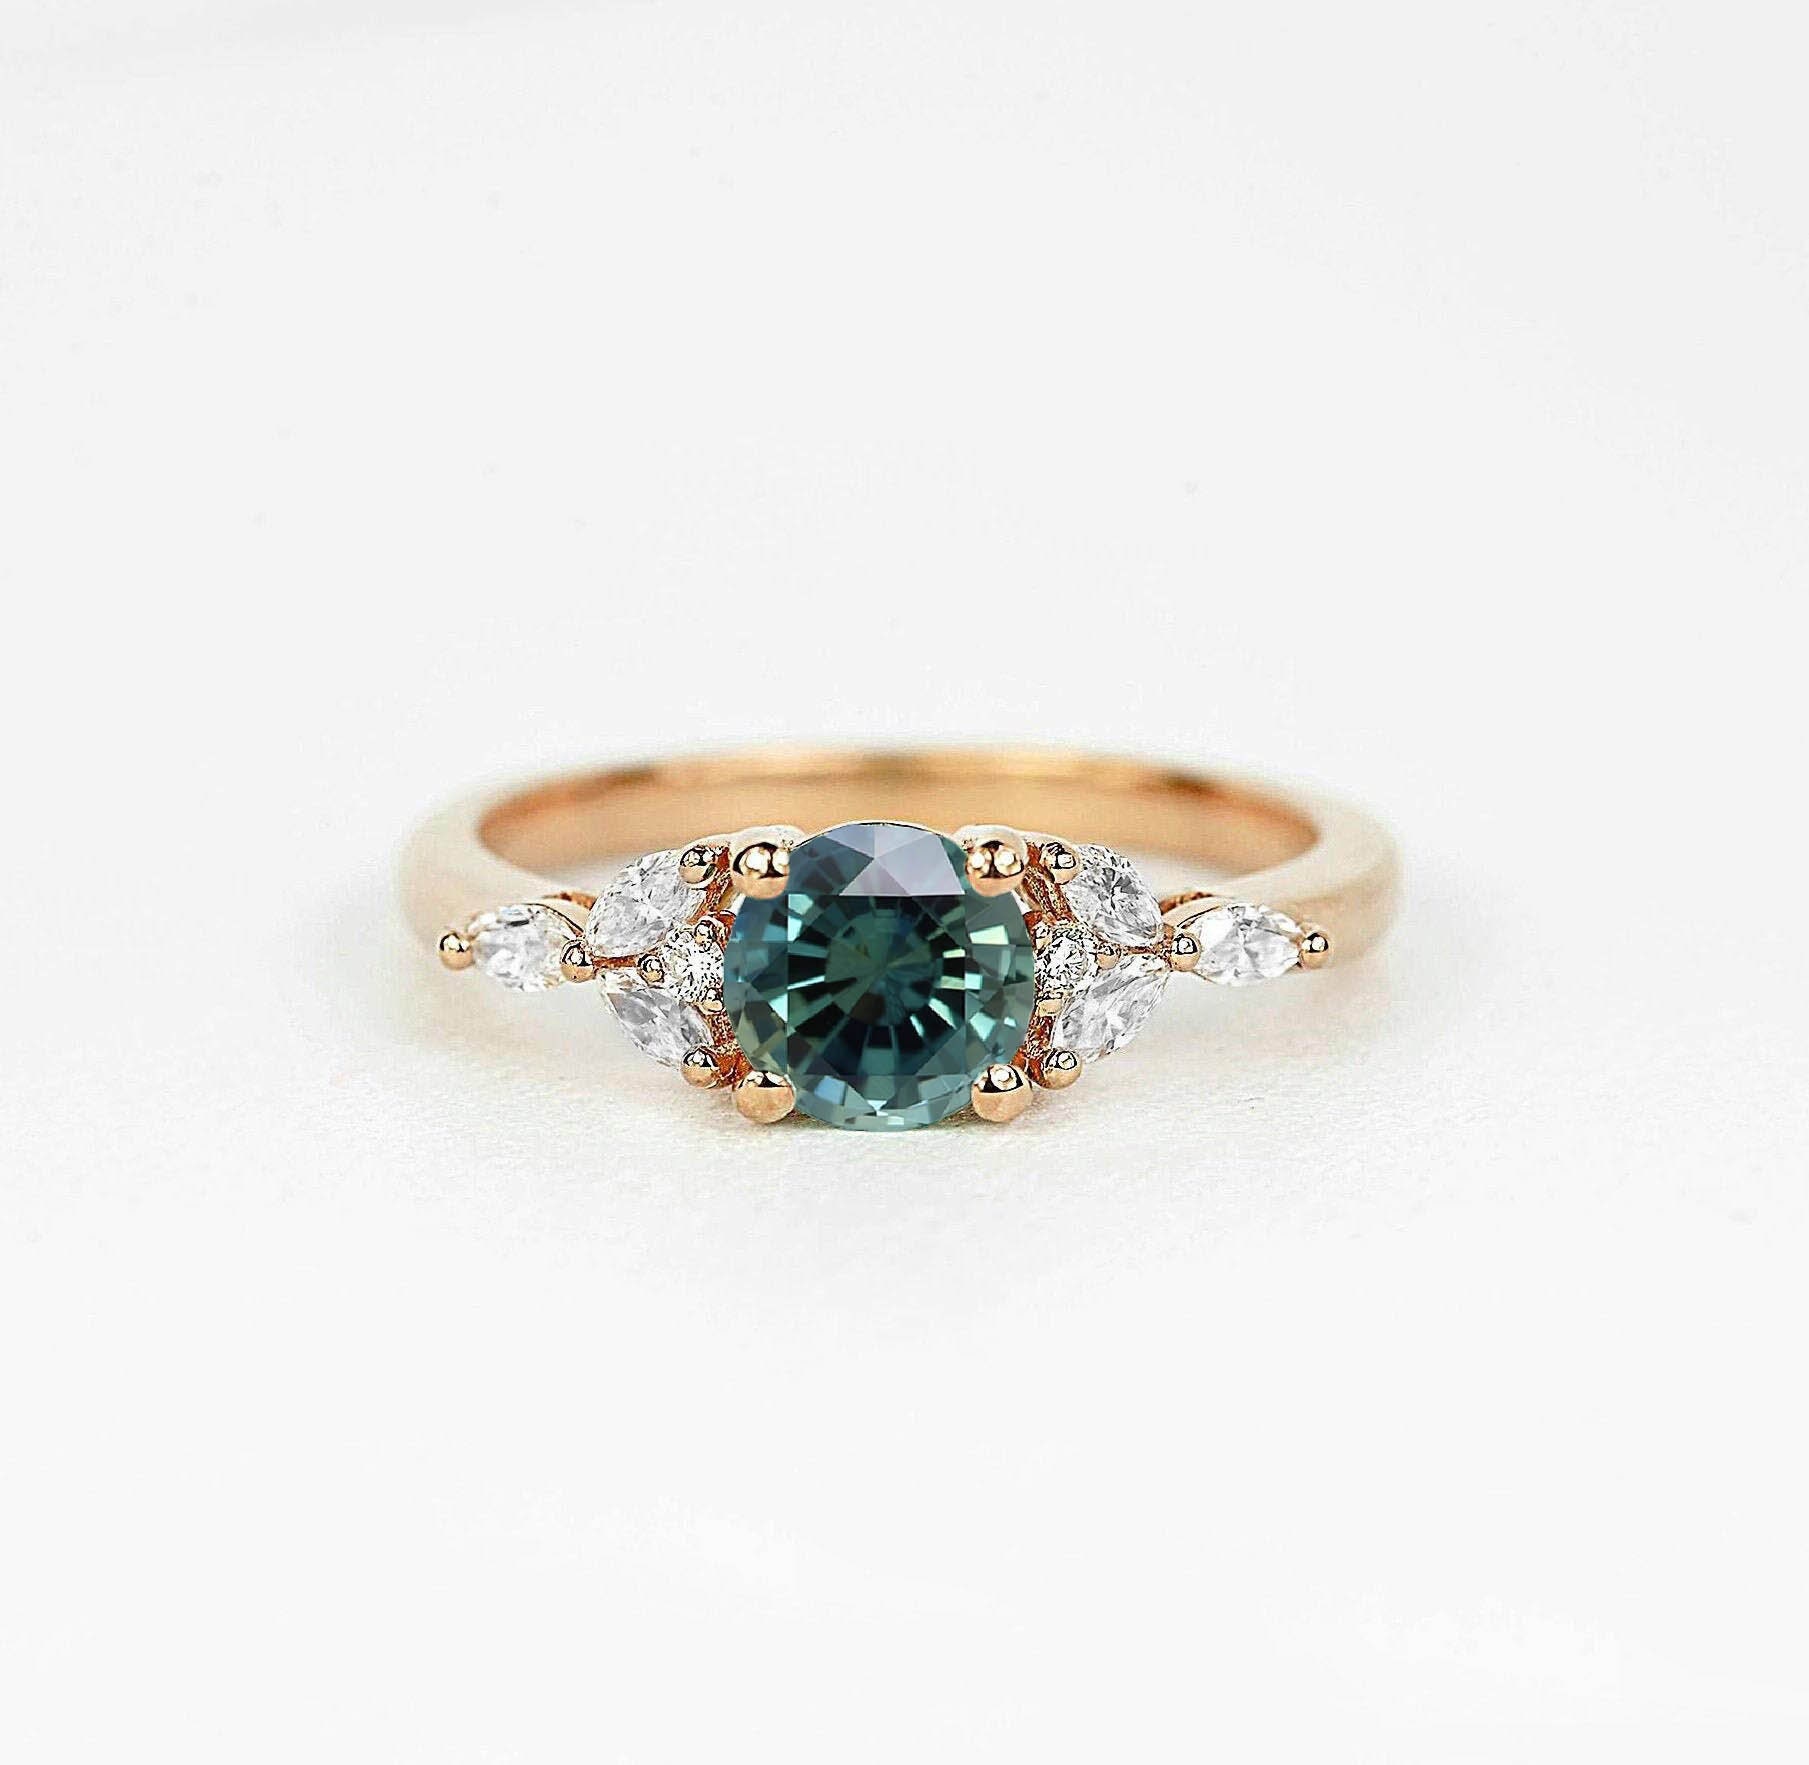 Round Teal Sapphire & Marquise Diamond Engagement Ring | Dainty Bridal Promise Art Deco Bespoke Vintage Ring